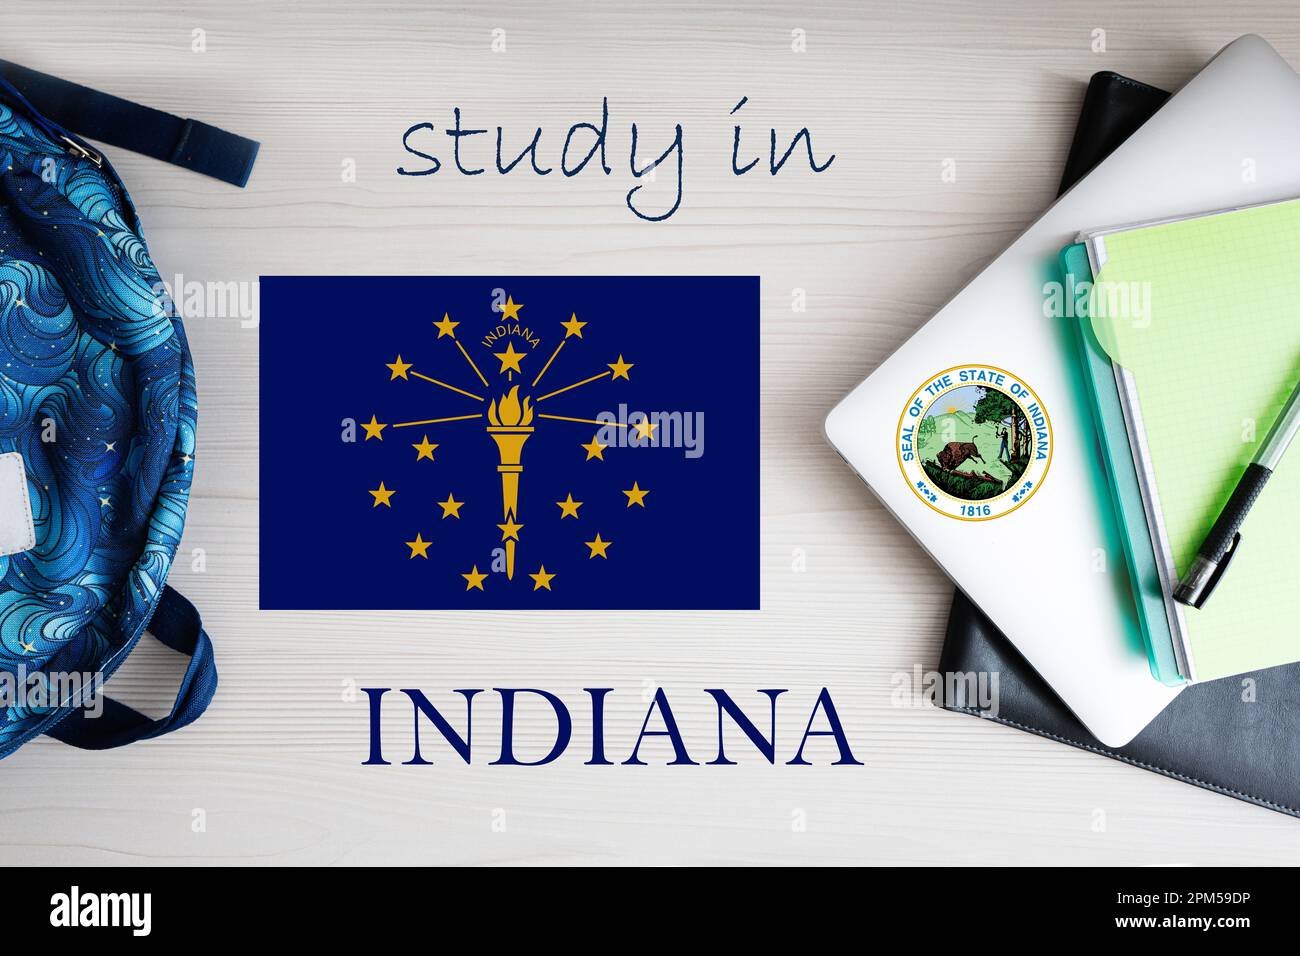 Study in Indiana. USA state. US education concept. Learn America concept. Stock Photo